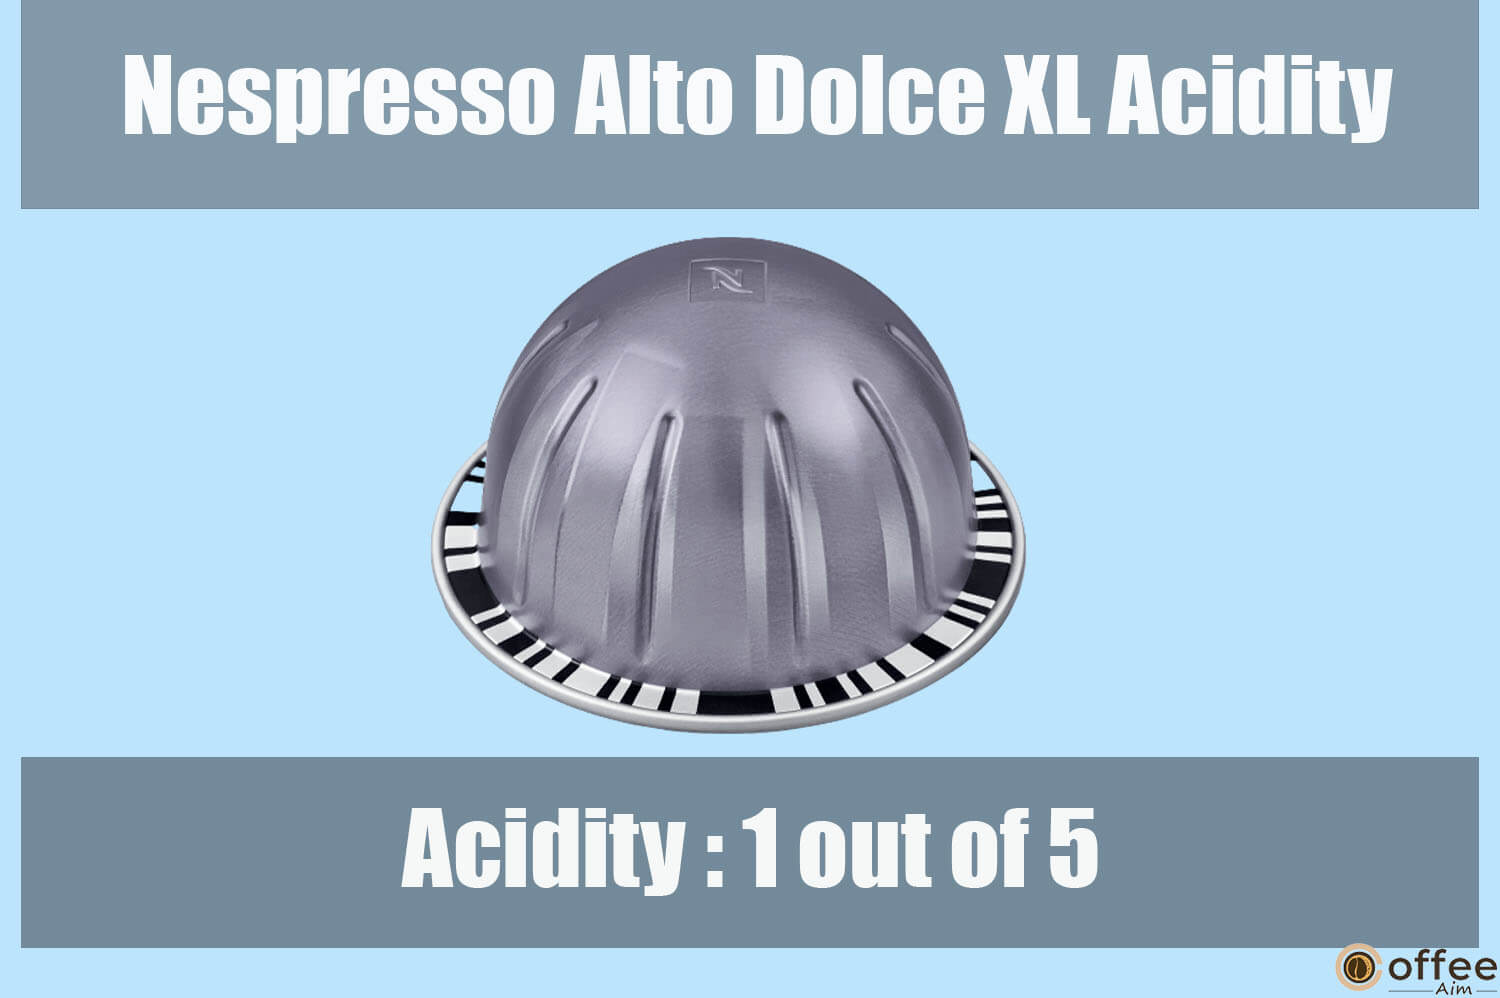 This image illustrates the acidity level of the Nespresso Alto Dolce XL Vertuo capsule in our review.